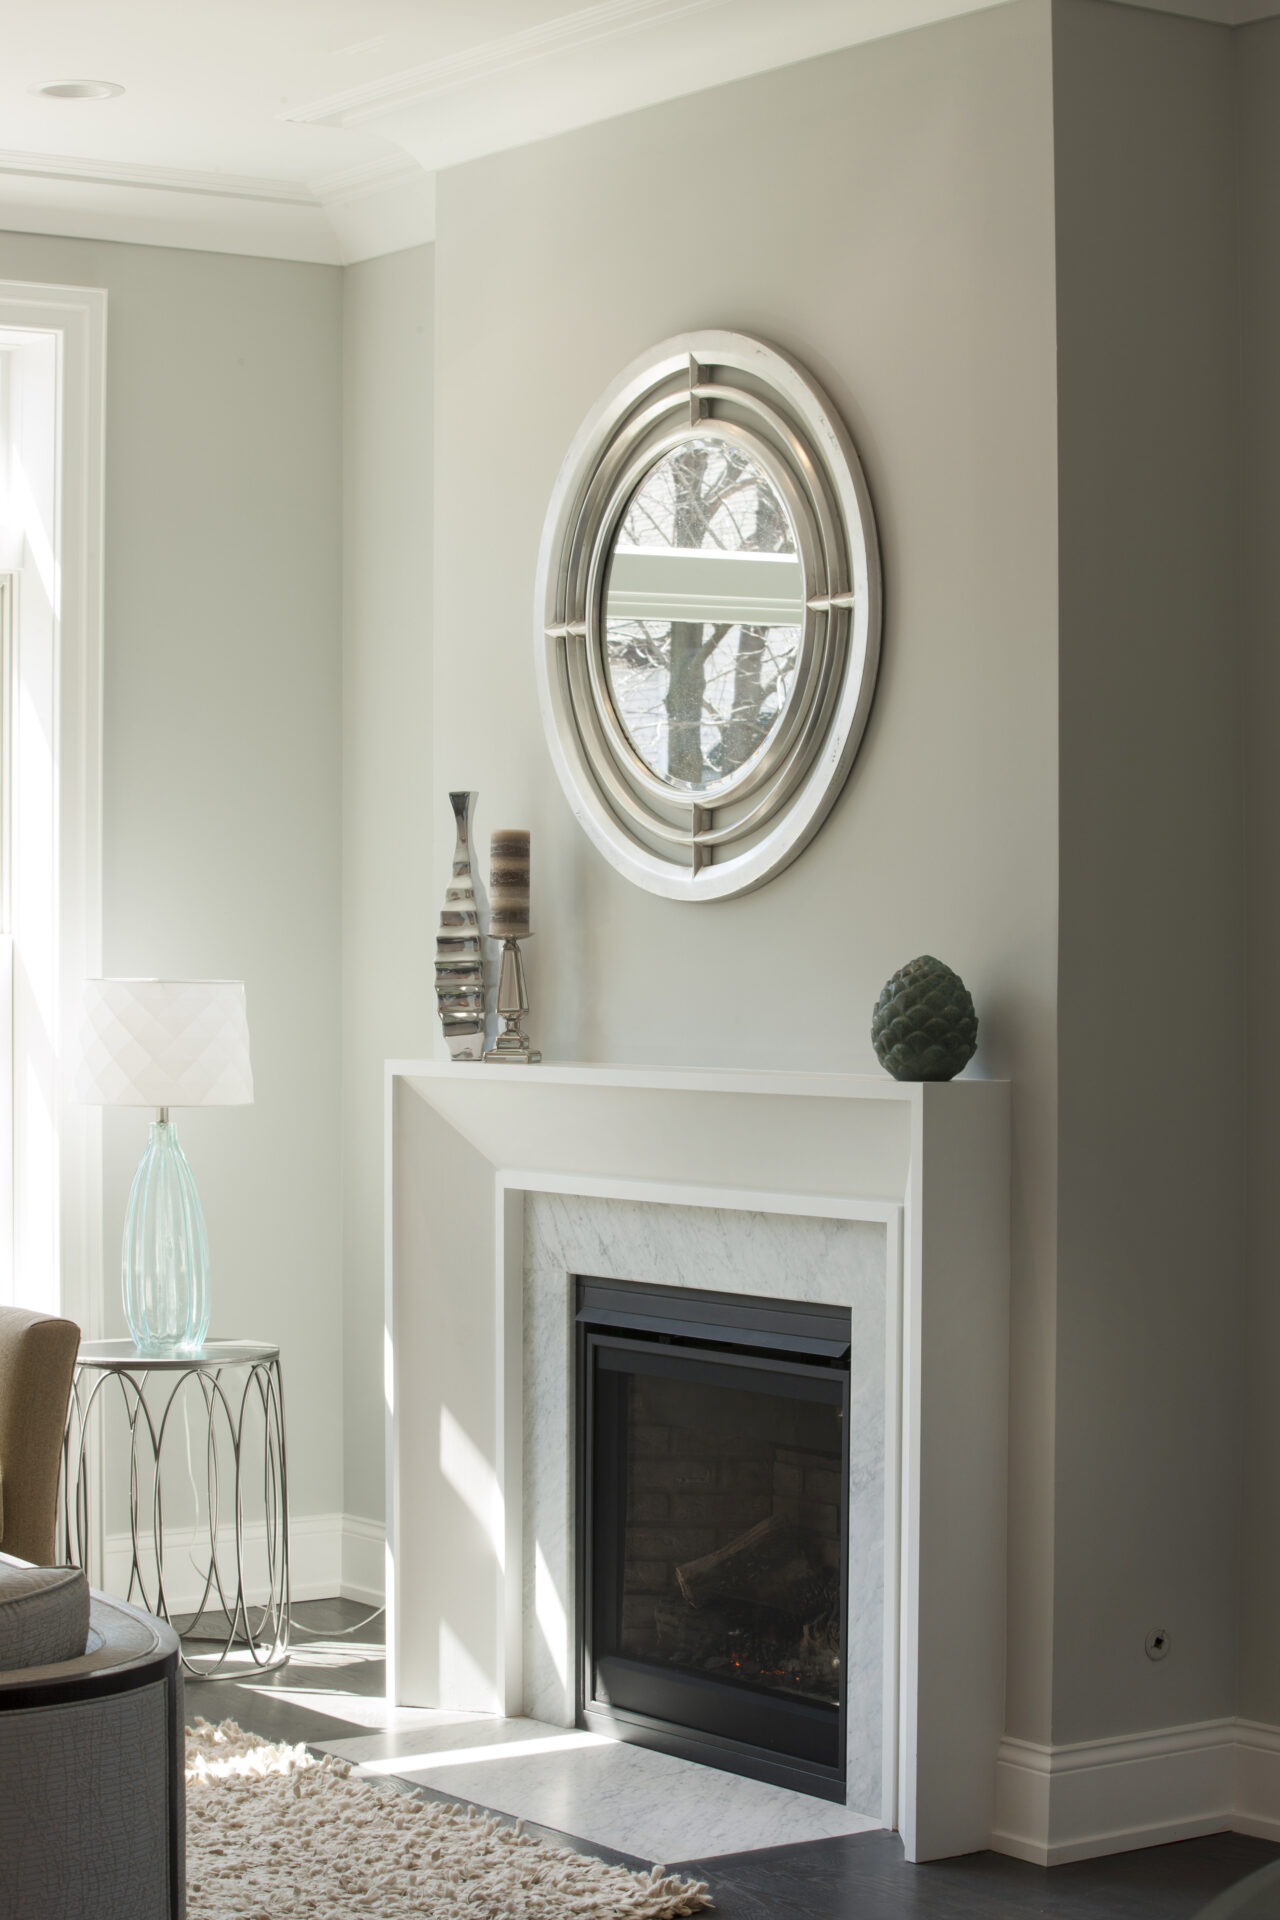 Fireplace and mirror